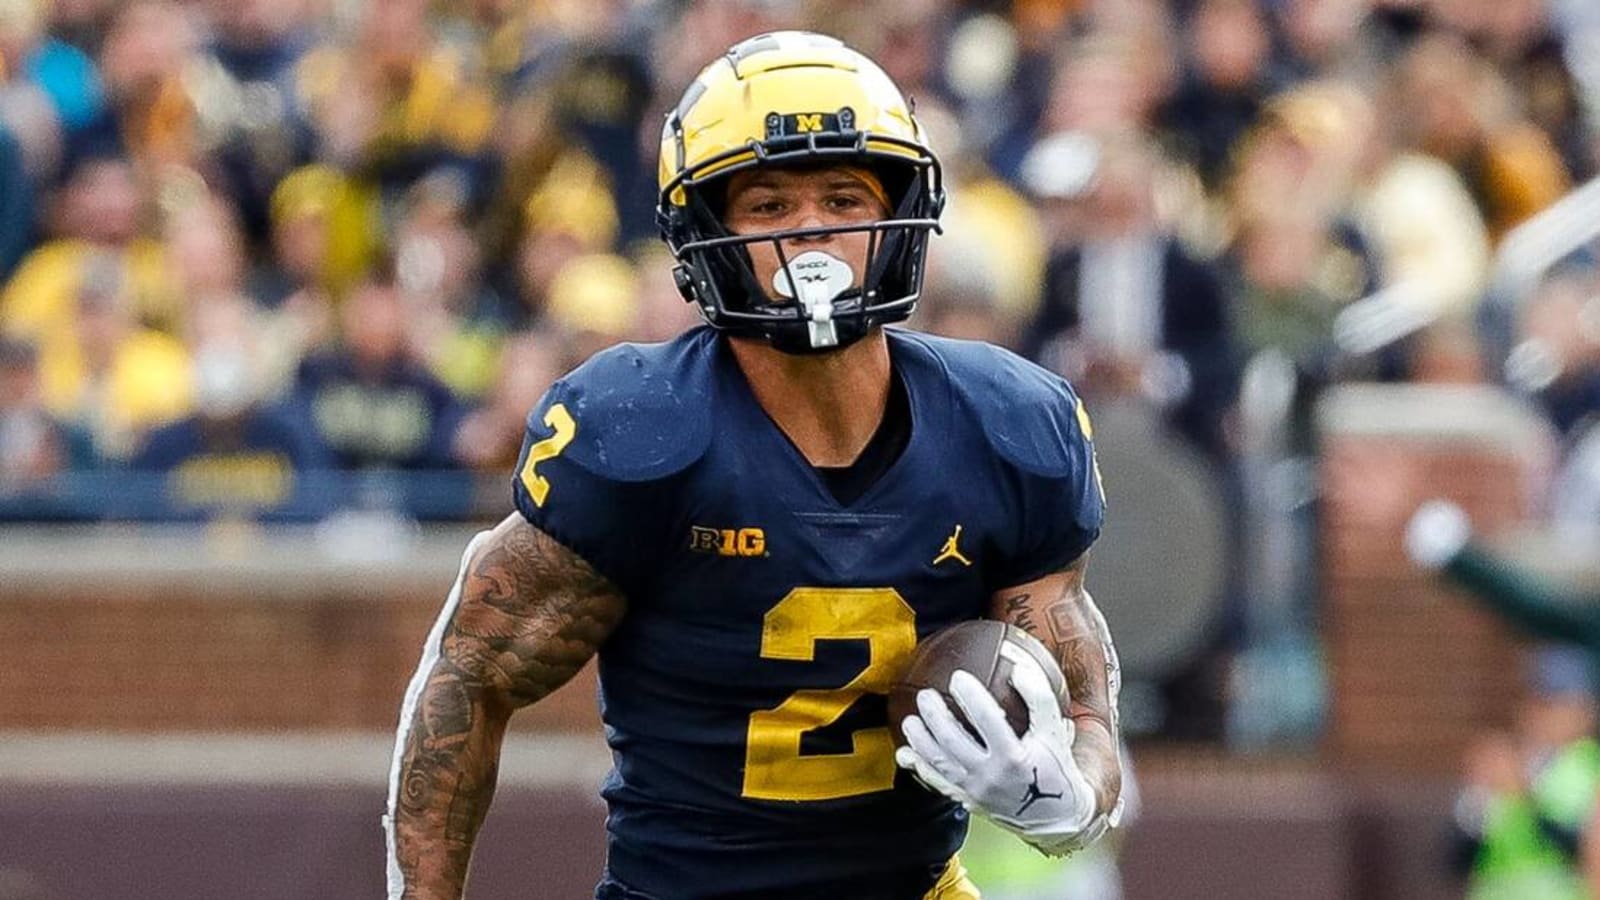 Why Blake Corum passed on NFL against Jim Harbaugh's advice